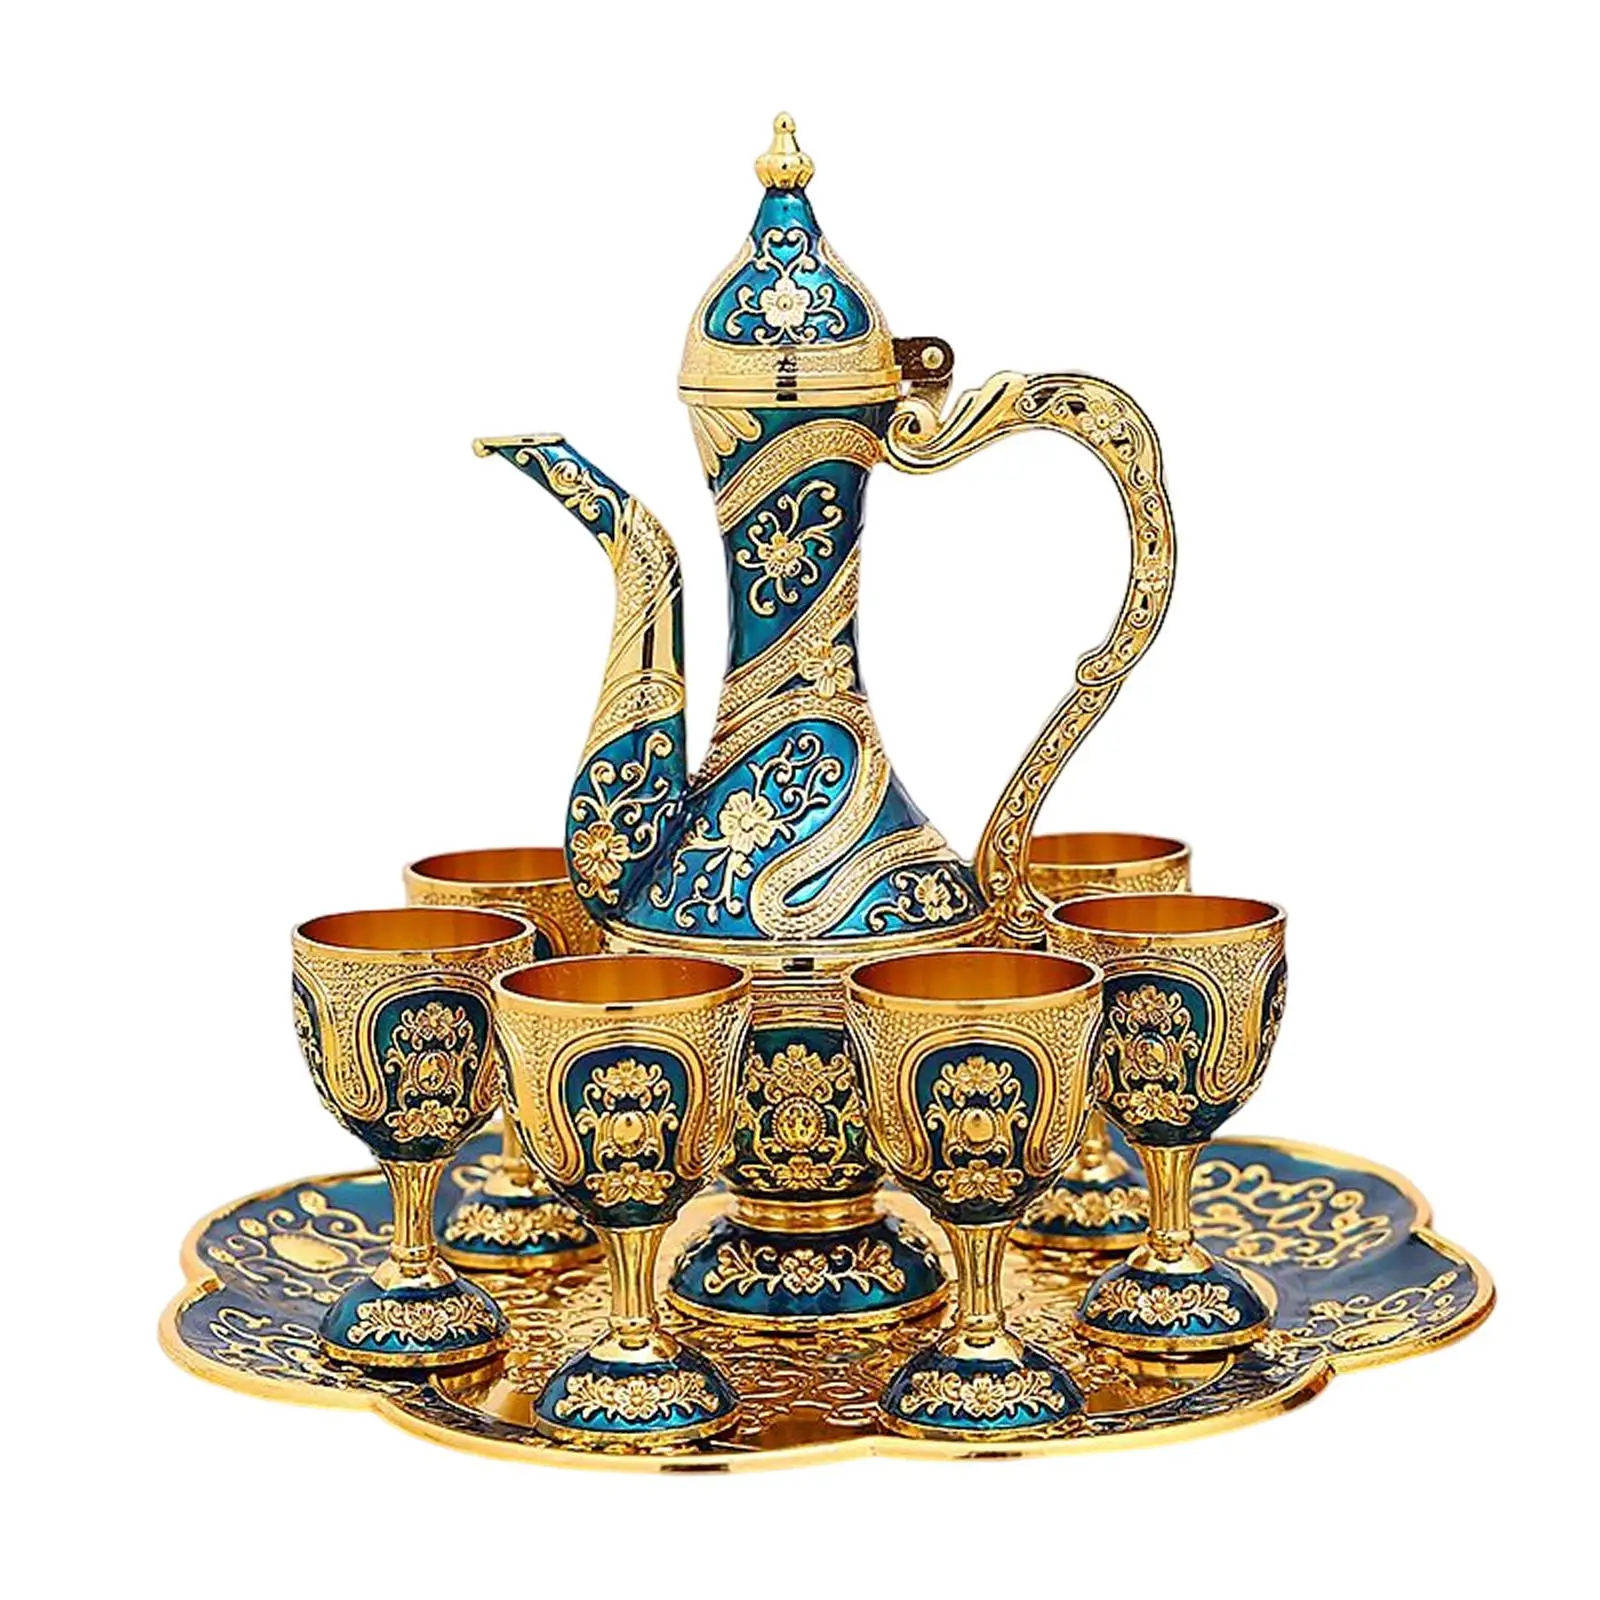 Vintage Turkish Coffee Pot Set Art Crafts Tea Sets with 6 Coffee Cups Crafts Tea Tray Teapot for Ornaments